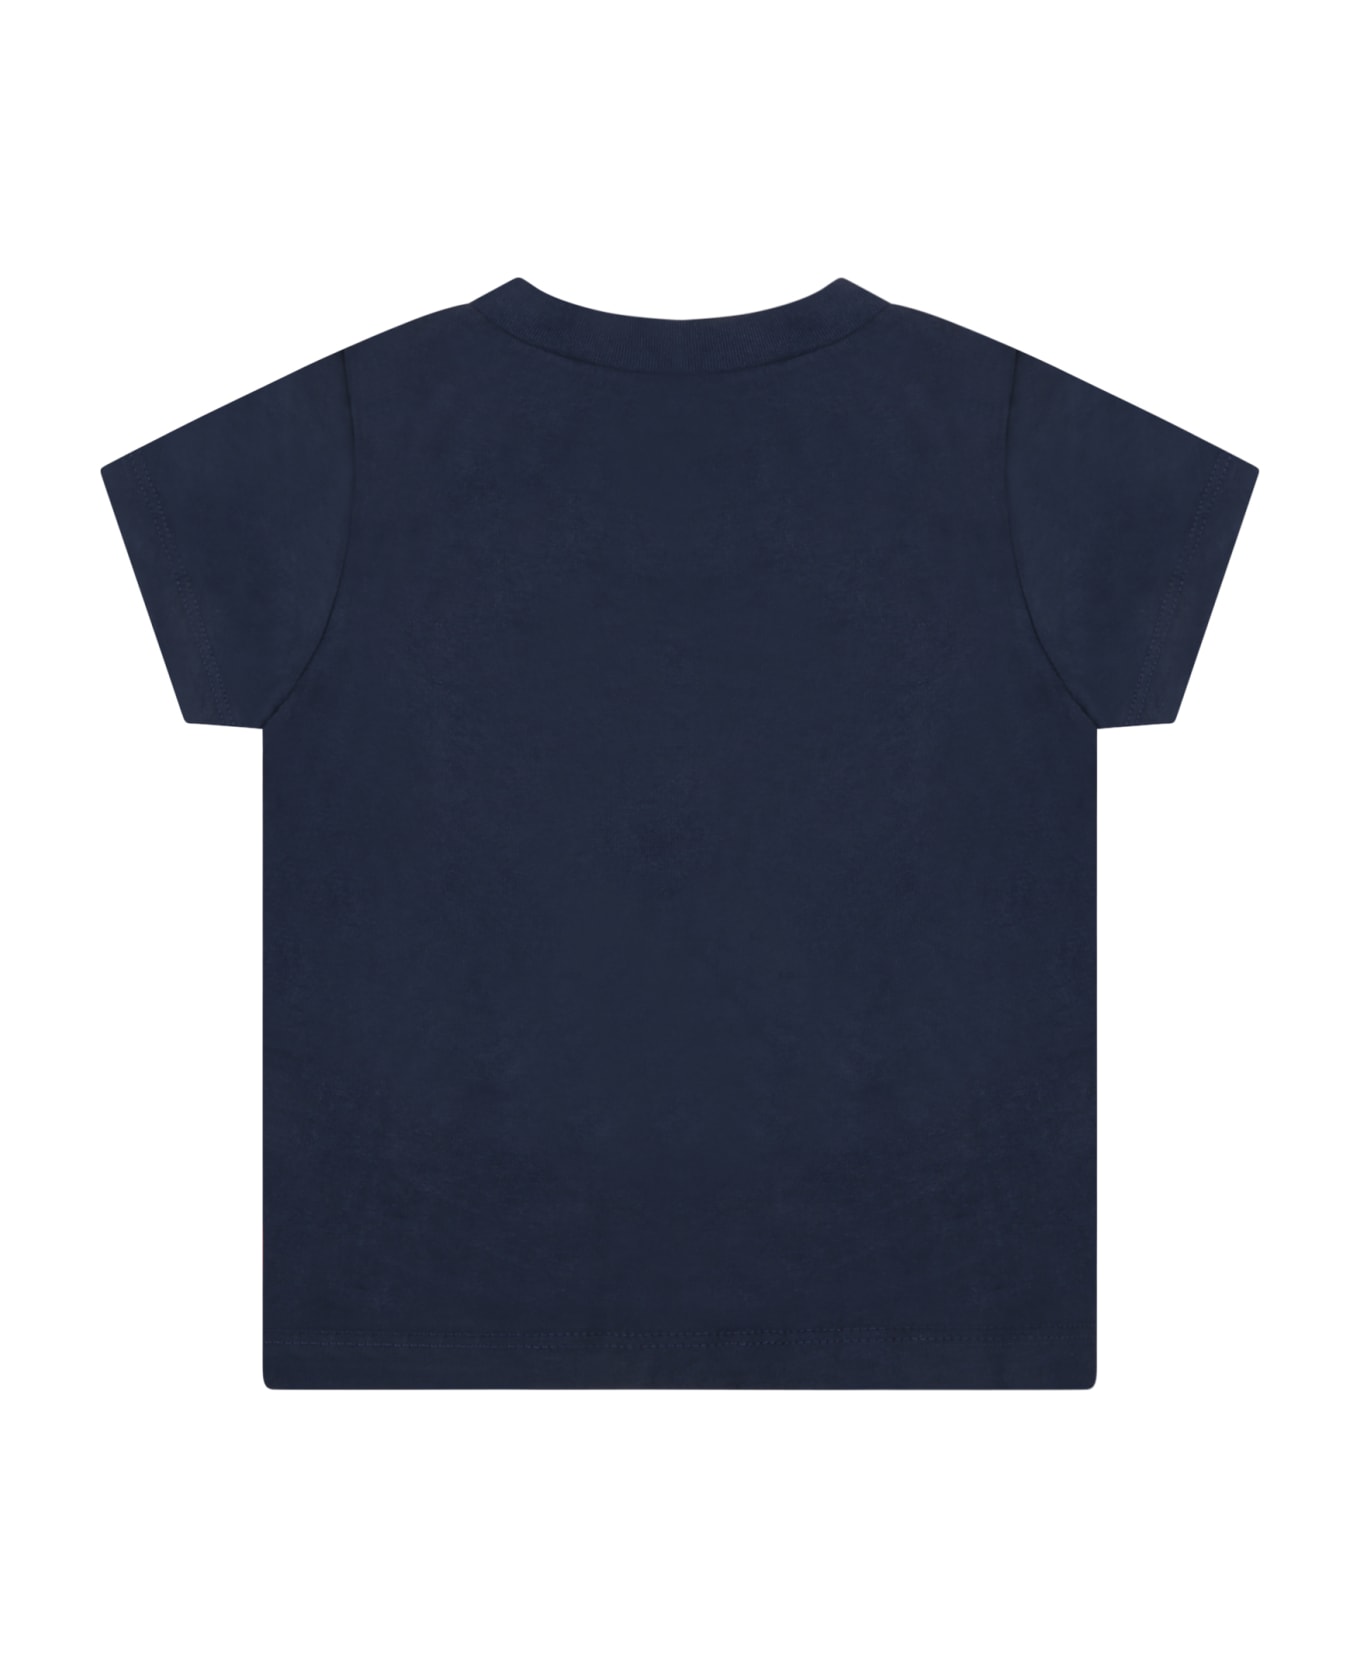 Levi's Blue T-shirt For Babies With Patch Logo - Blu Tシャツ＆ポロシャツ